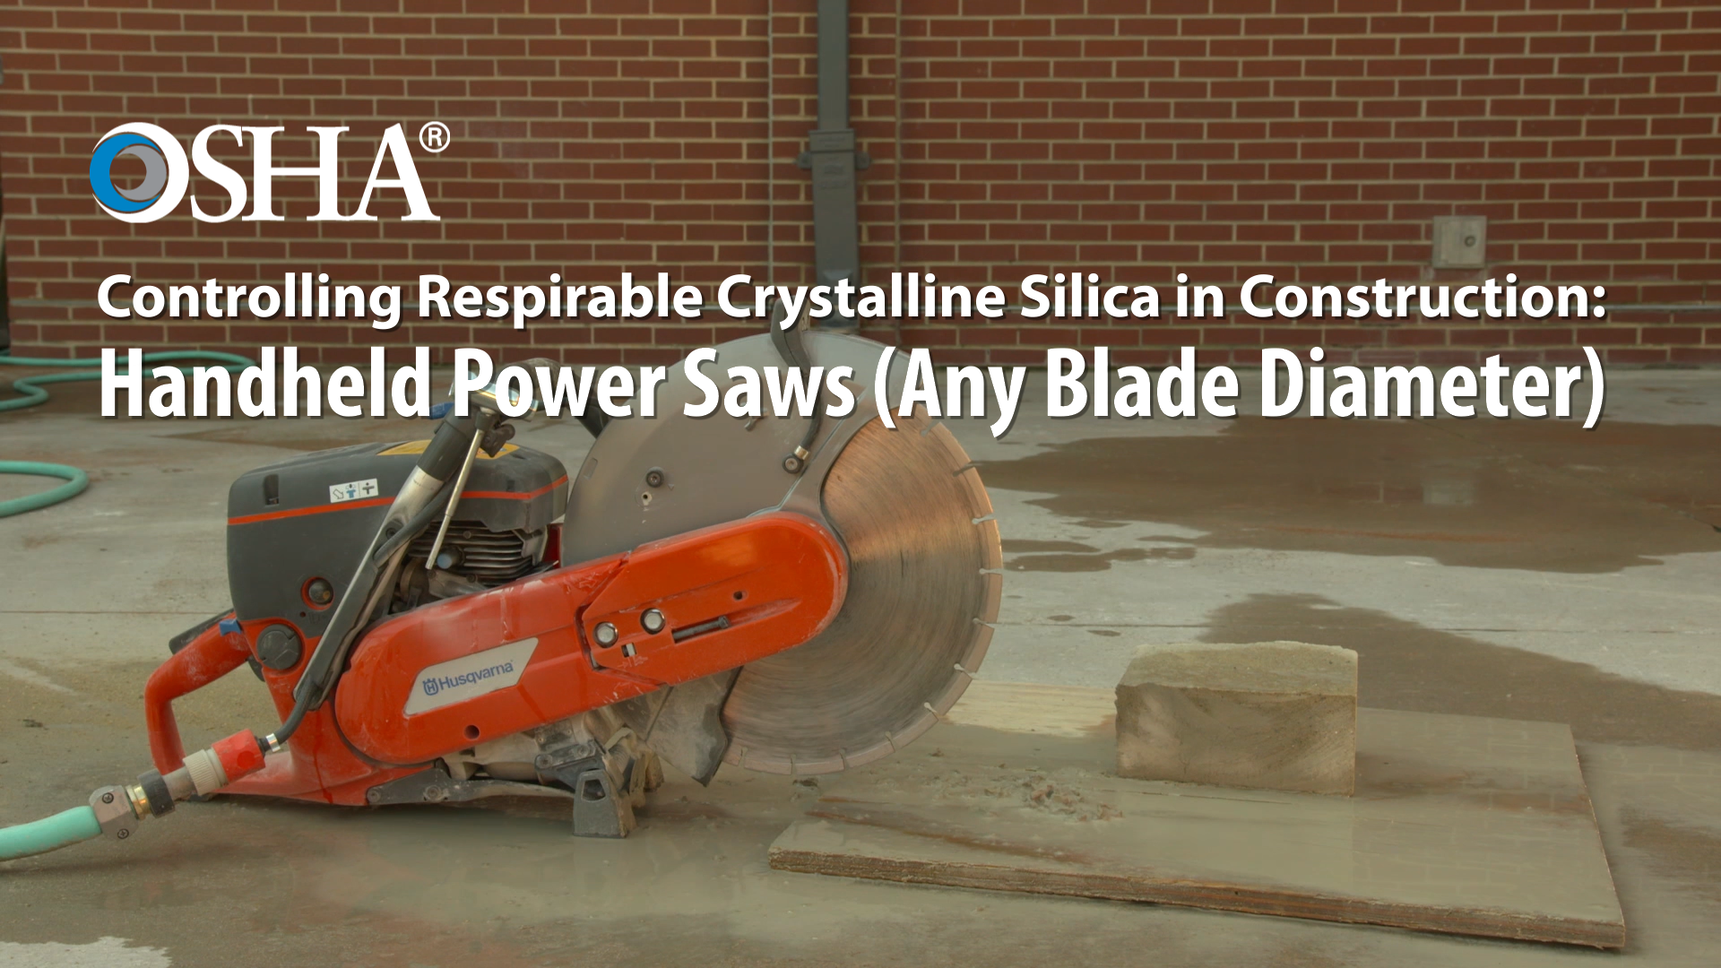 Controlling Respirable Crystalline Silica in Construction: Handheld Power Saws